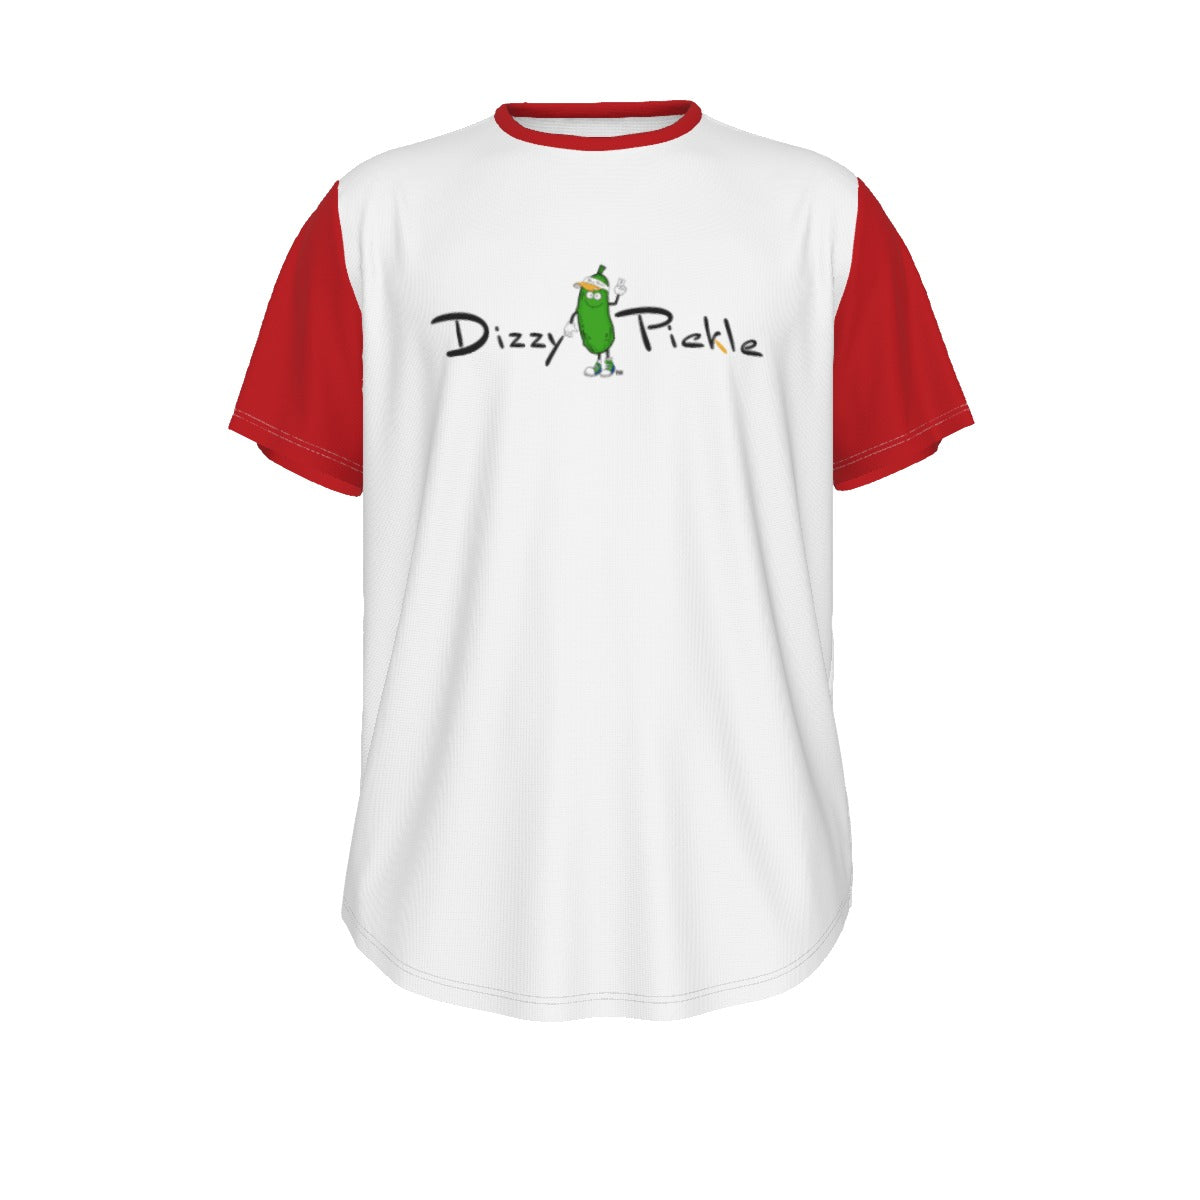 DZY P Classic - White/Red - Men's Short Sleeve Rounded Hem by Dizzy Pickle